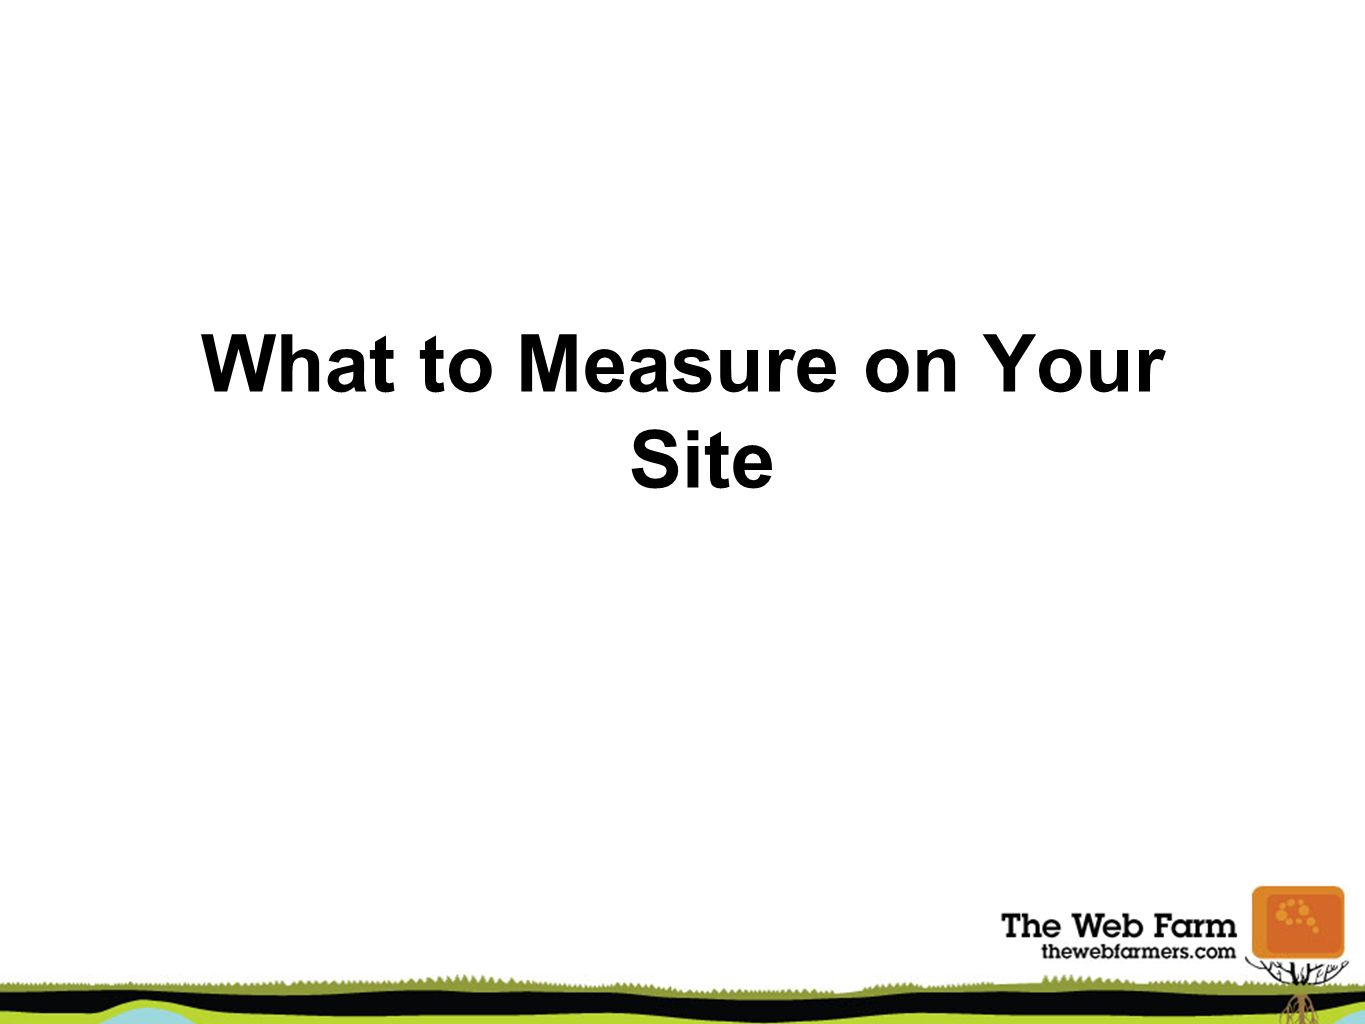 What to Measure on Your Site